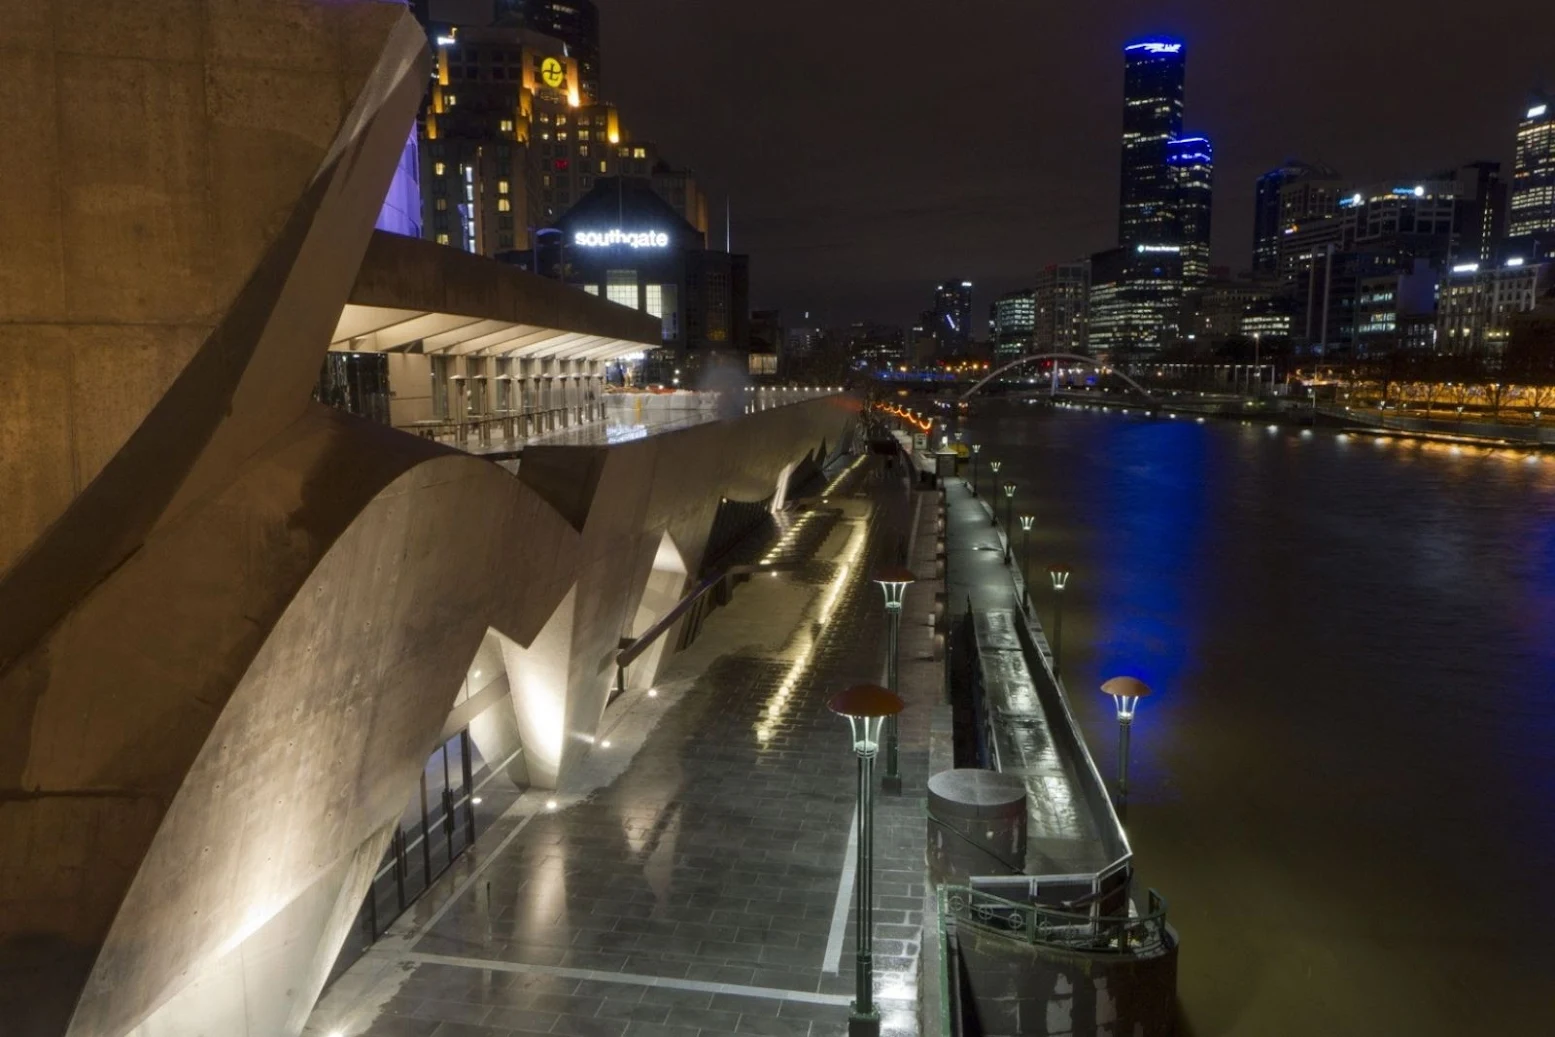 Hamer Hall by ARM Architecture